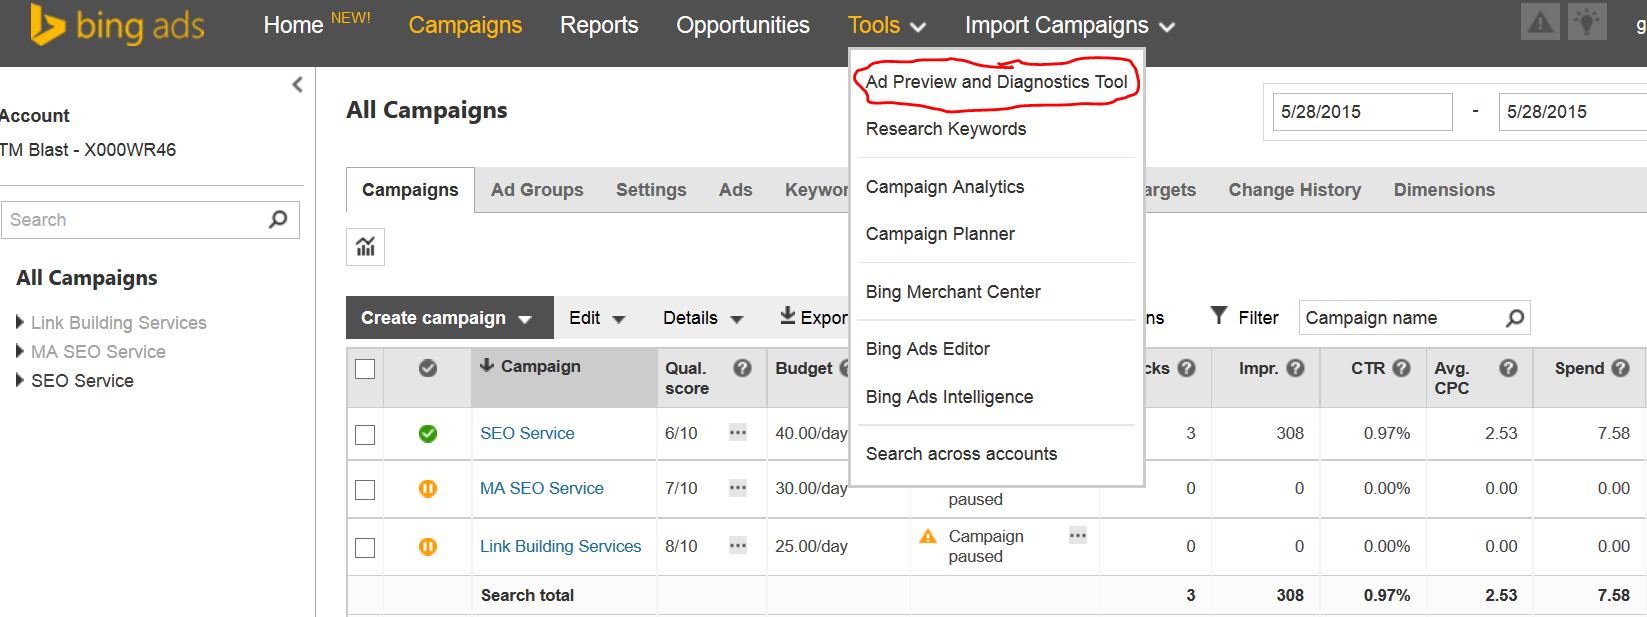 Ad Preview and Diagnostics Tool in Bing Ads